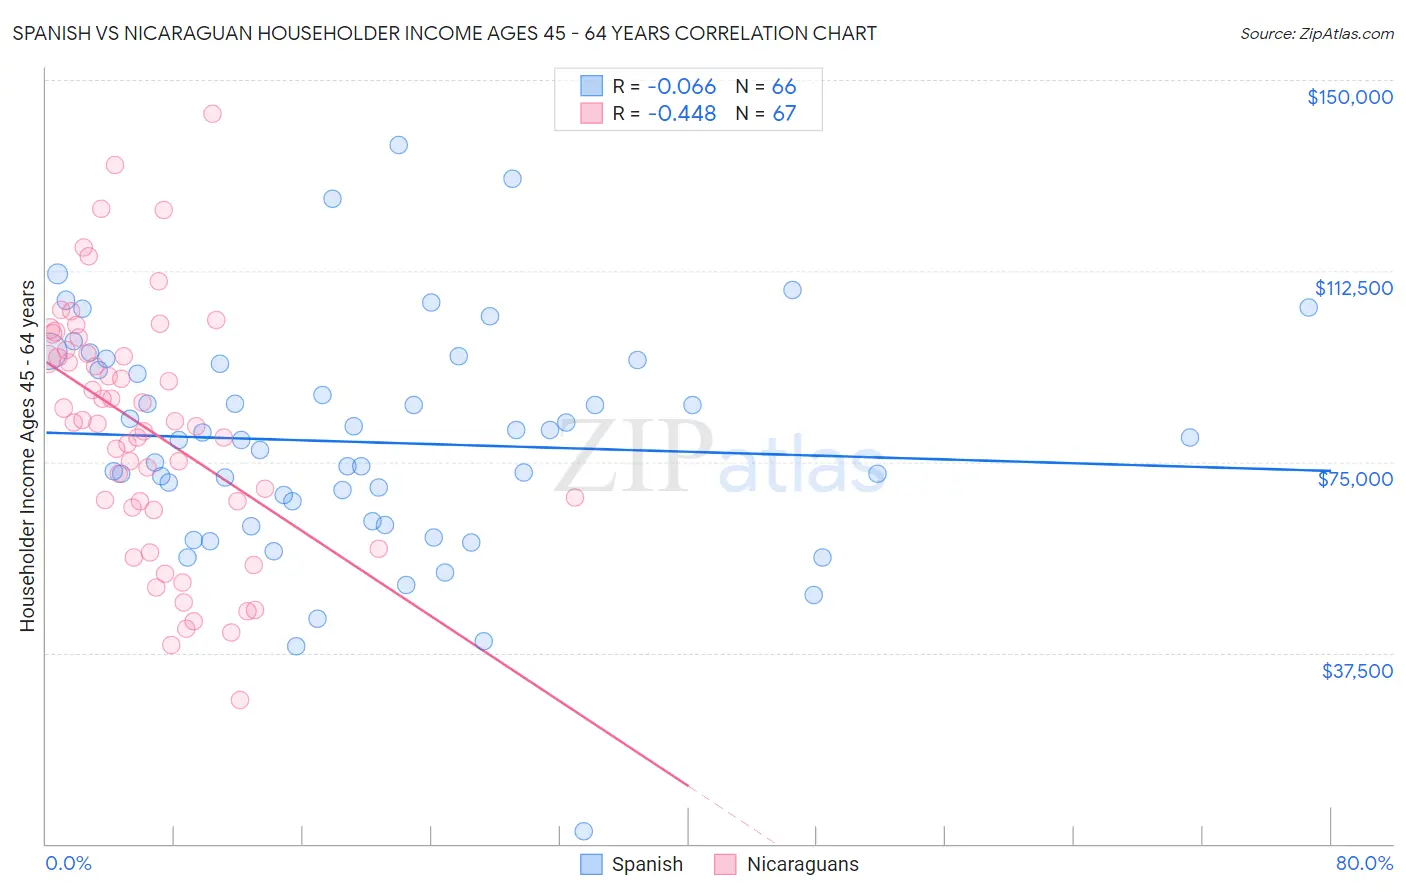 Spanish vs Nicaraguan Householder Income Ages 45 - 64 years